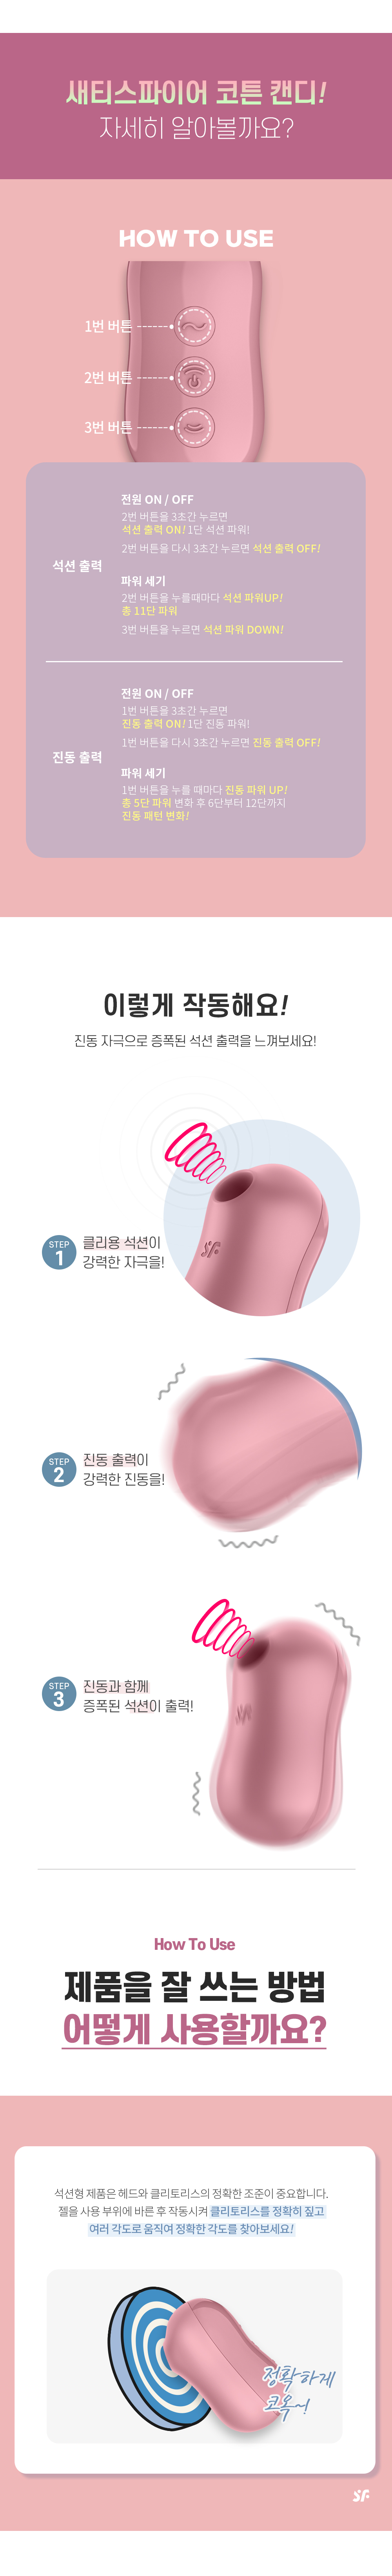 SATISFYER COTTON CANDY (2 COLOR)